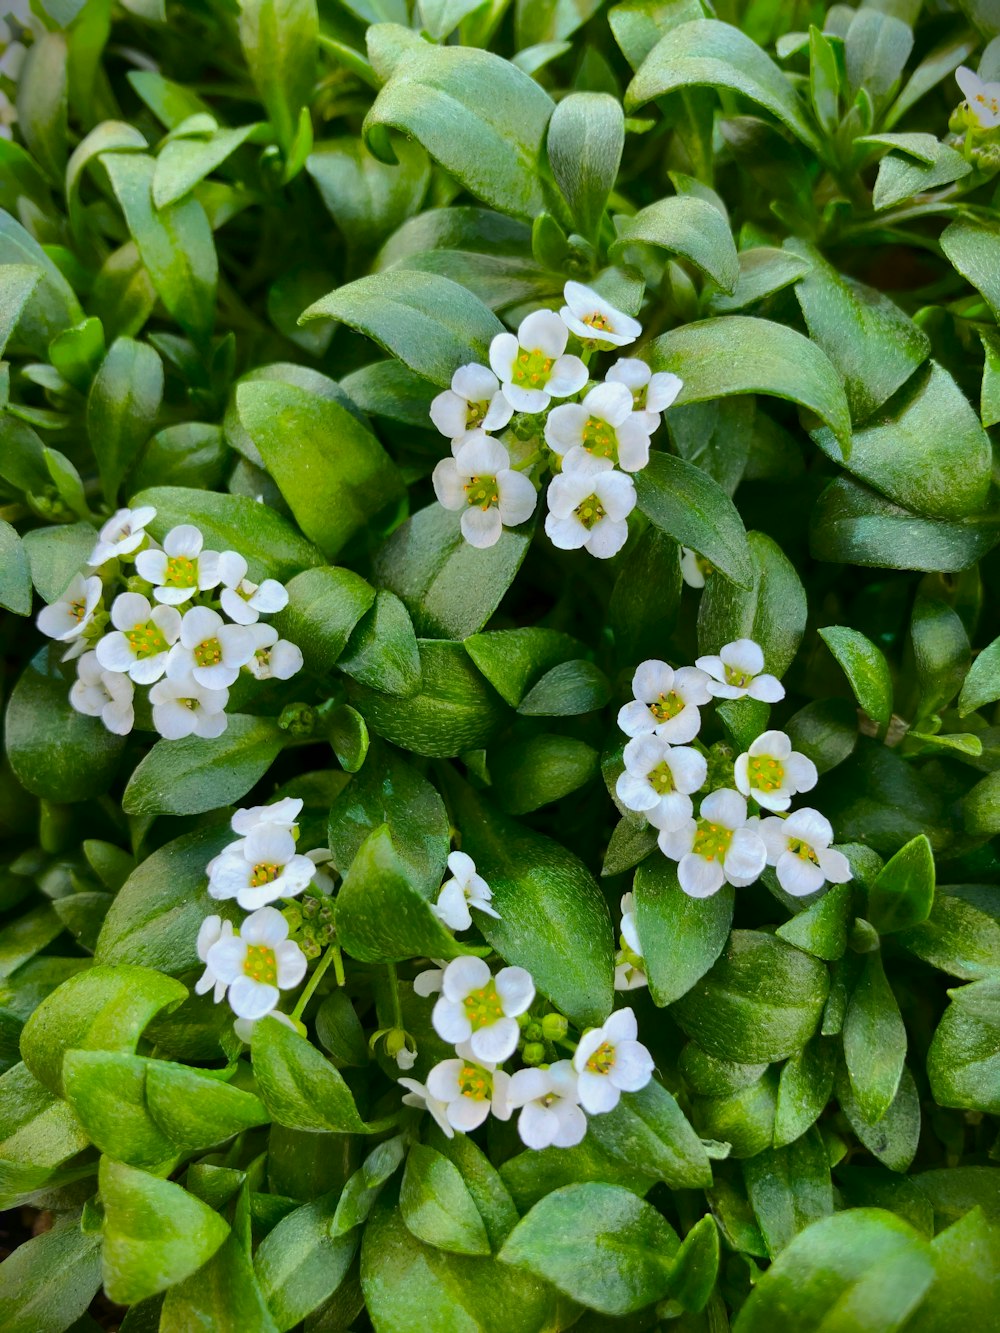 a group of small white flowers surrounded by green leaves